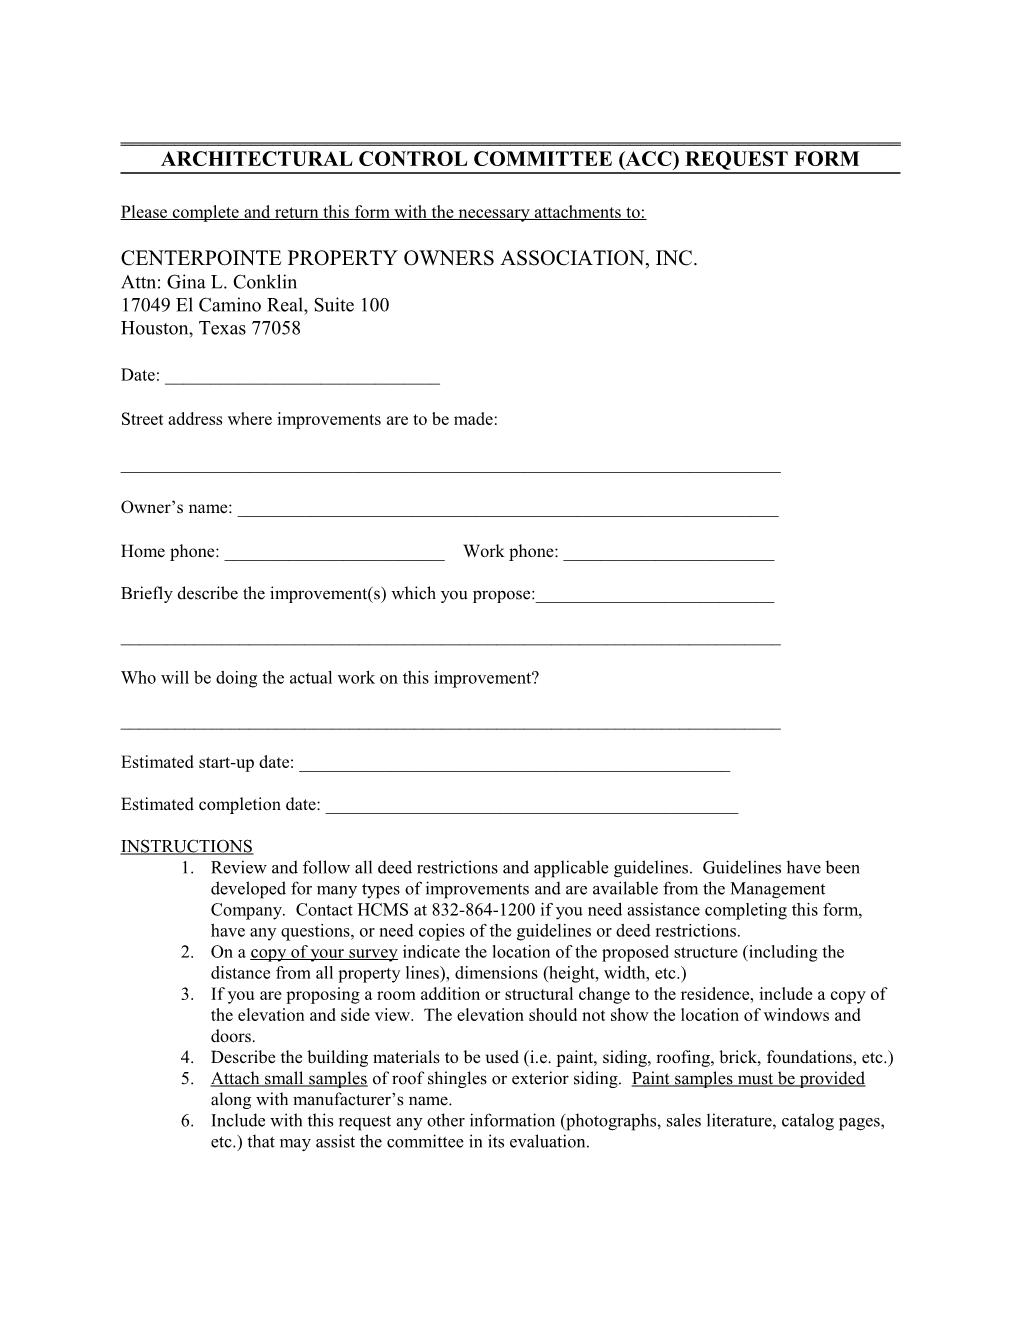 Architectural Control Committee (Acc) Request Form